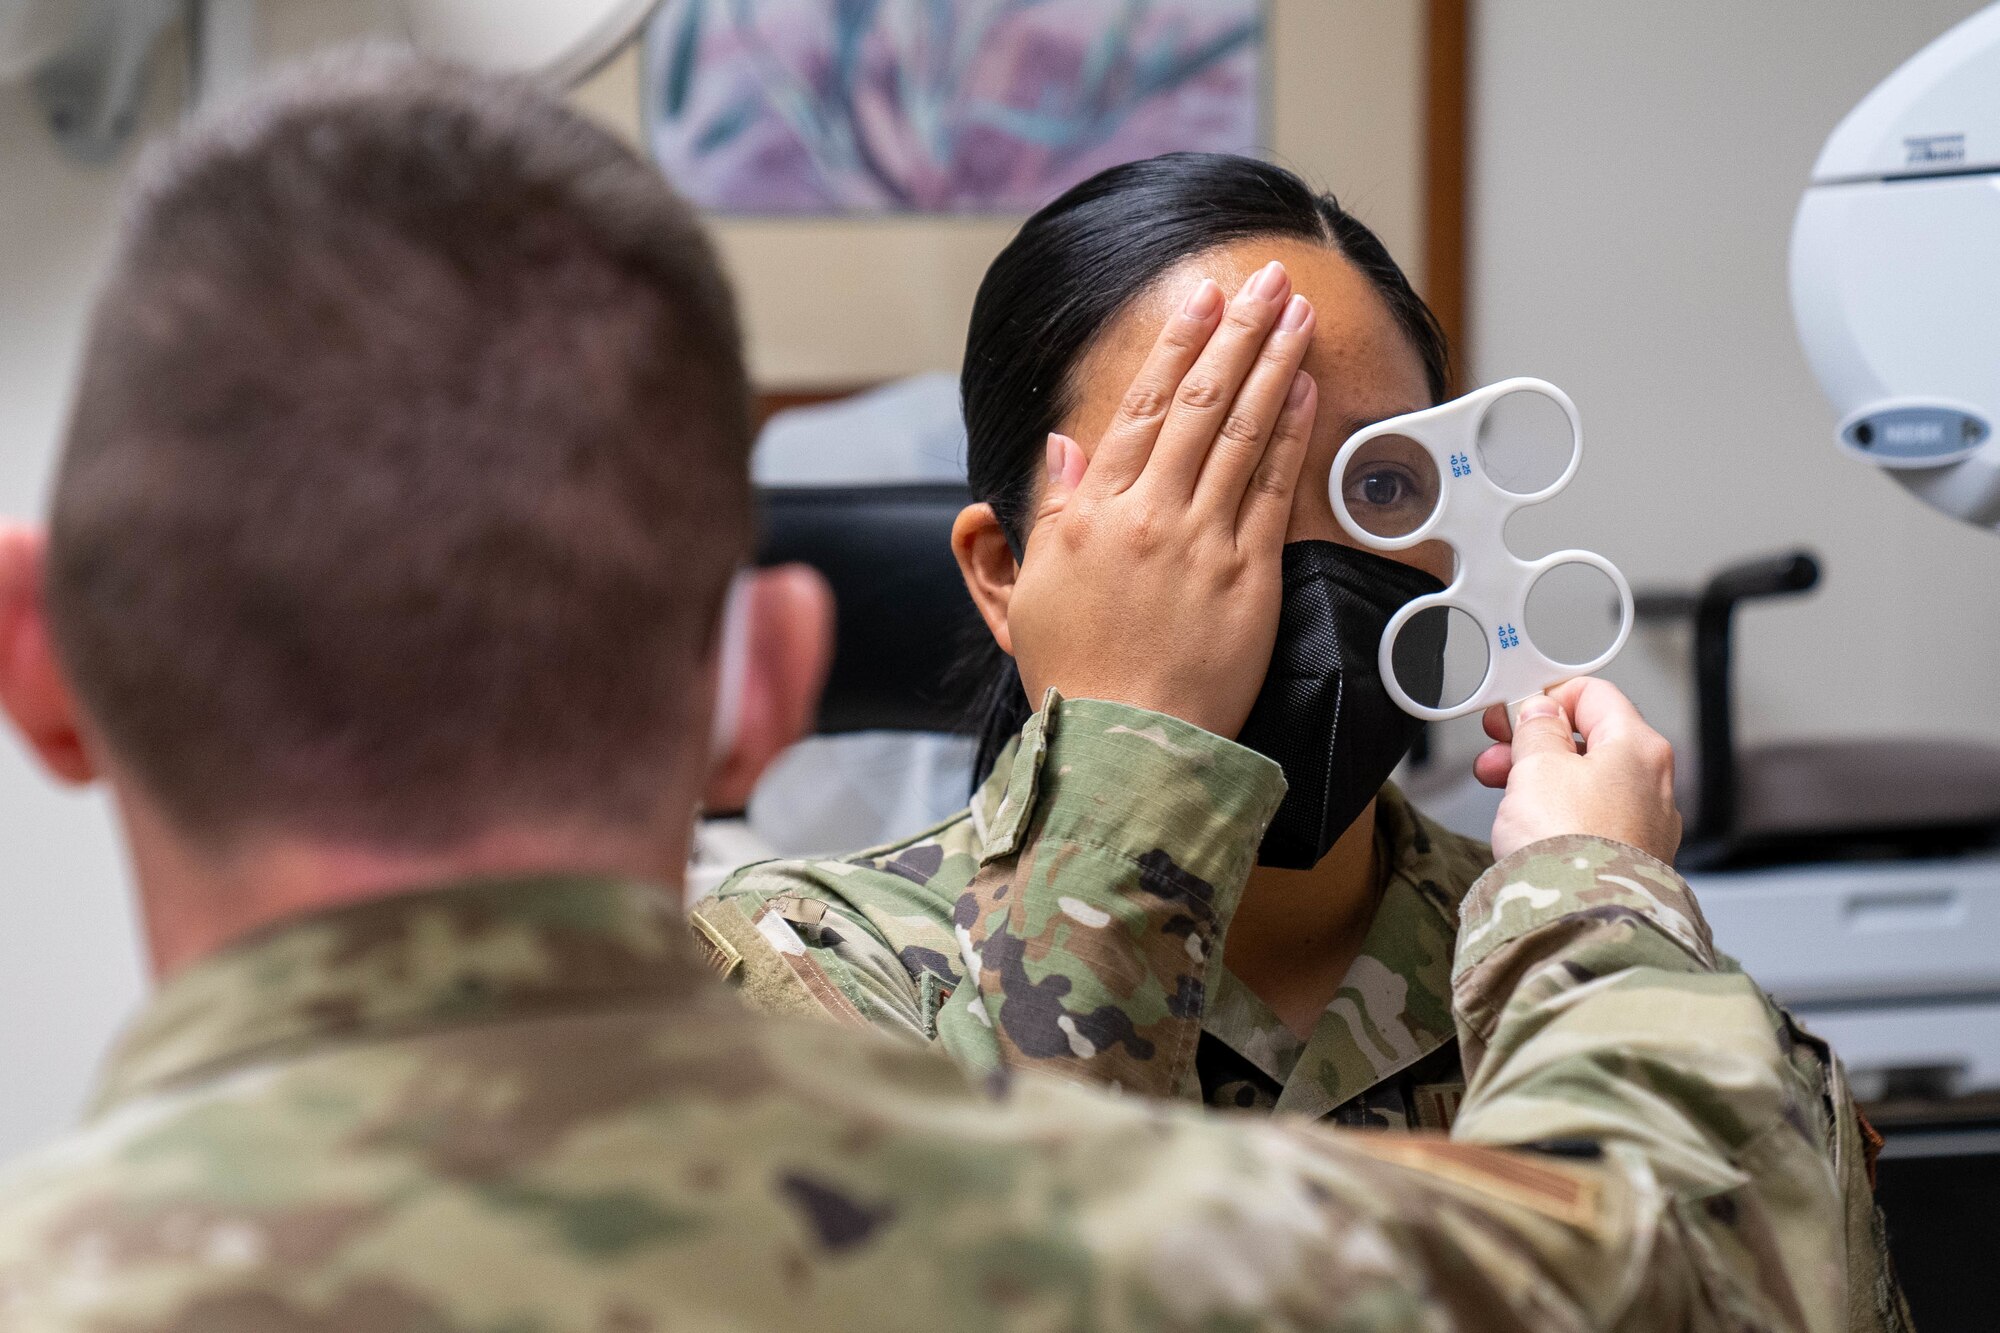 Capt. Dominic Rentz, 15th Operational Medical Readiness Squadron optometrist, examines the eyes of 1st Lt. Denise Guiao-Corpuz, 15th Wing Public Affairs chief, during a routine eye exam at Joint Base Pearl Harbor-Hickam, Hawaii, April 19, 2022. Optometry technicians aid in the diagnosis of eye disorders and help assist Airmen with glasses, while playing an integral part in helping patients with their eye health. (U.S. Air Force photo by Airman 1st Class Makensie Cooper)